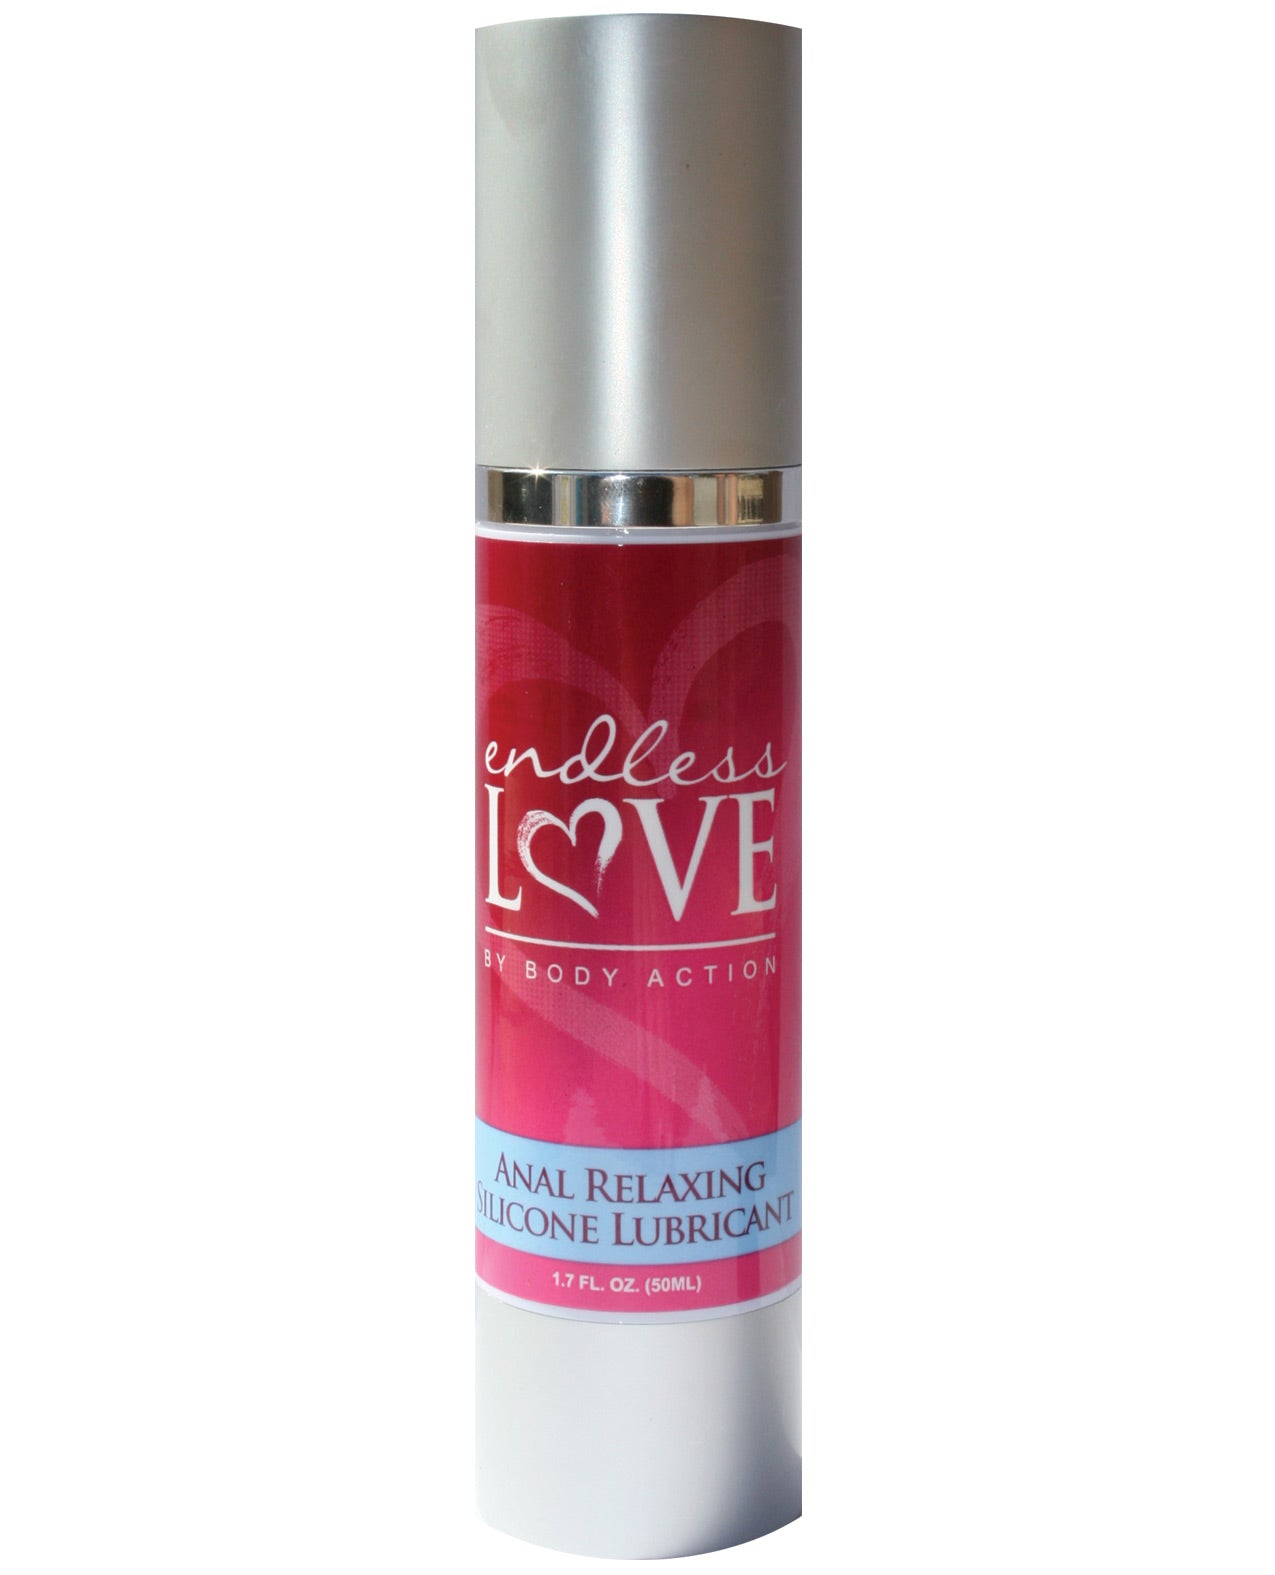 Endless Love Relaxing Anal Silicone Lubricant - 1.7 Oz - LUST Depot